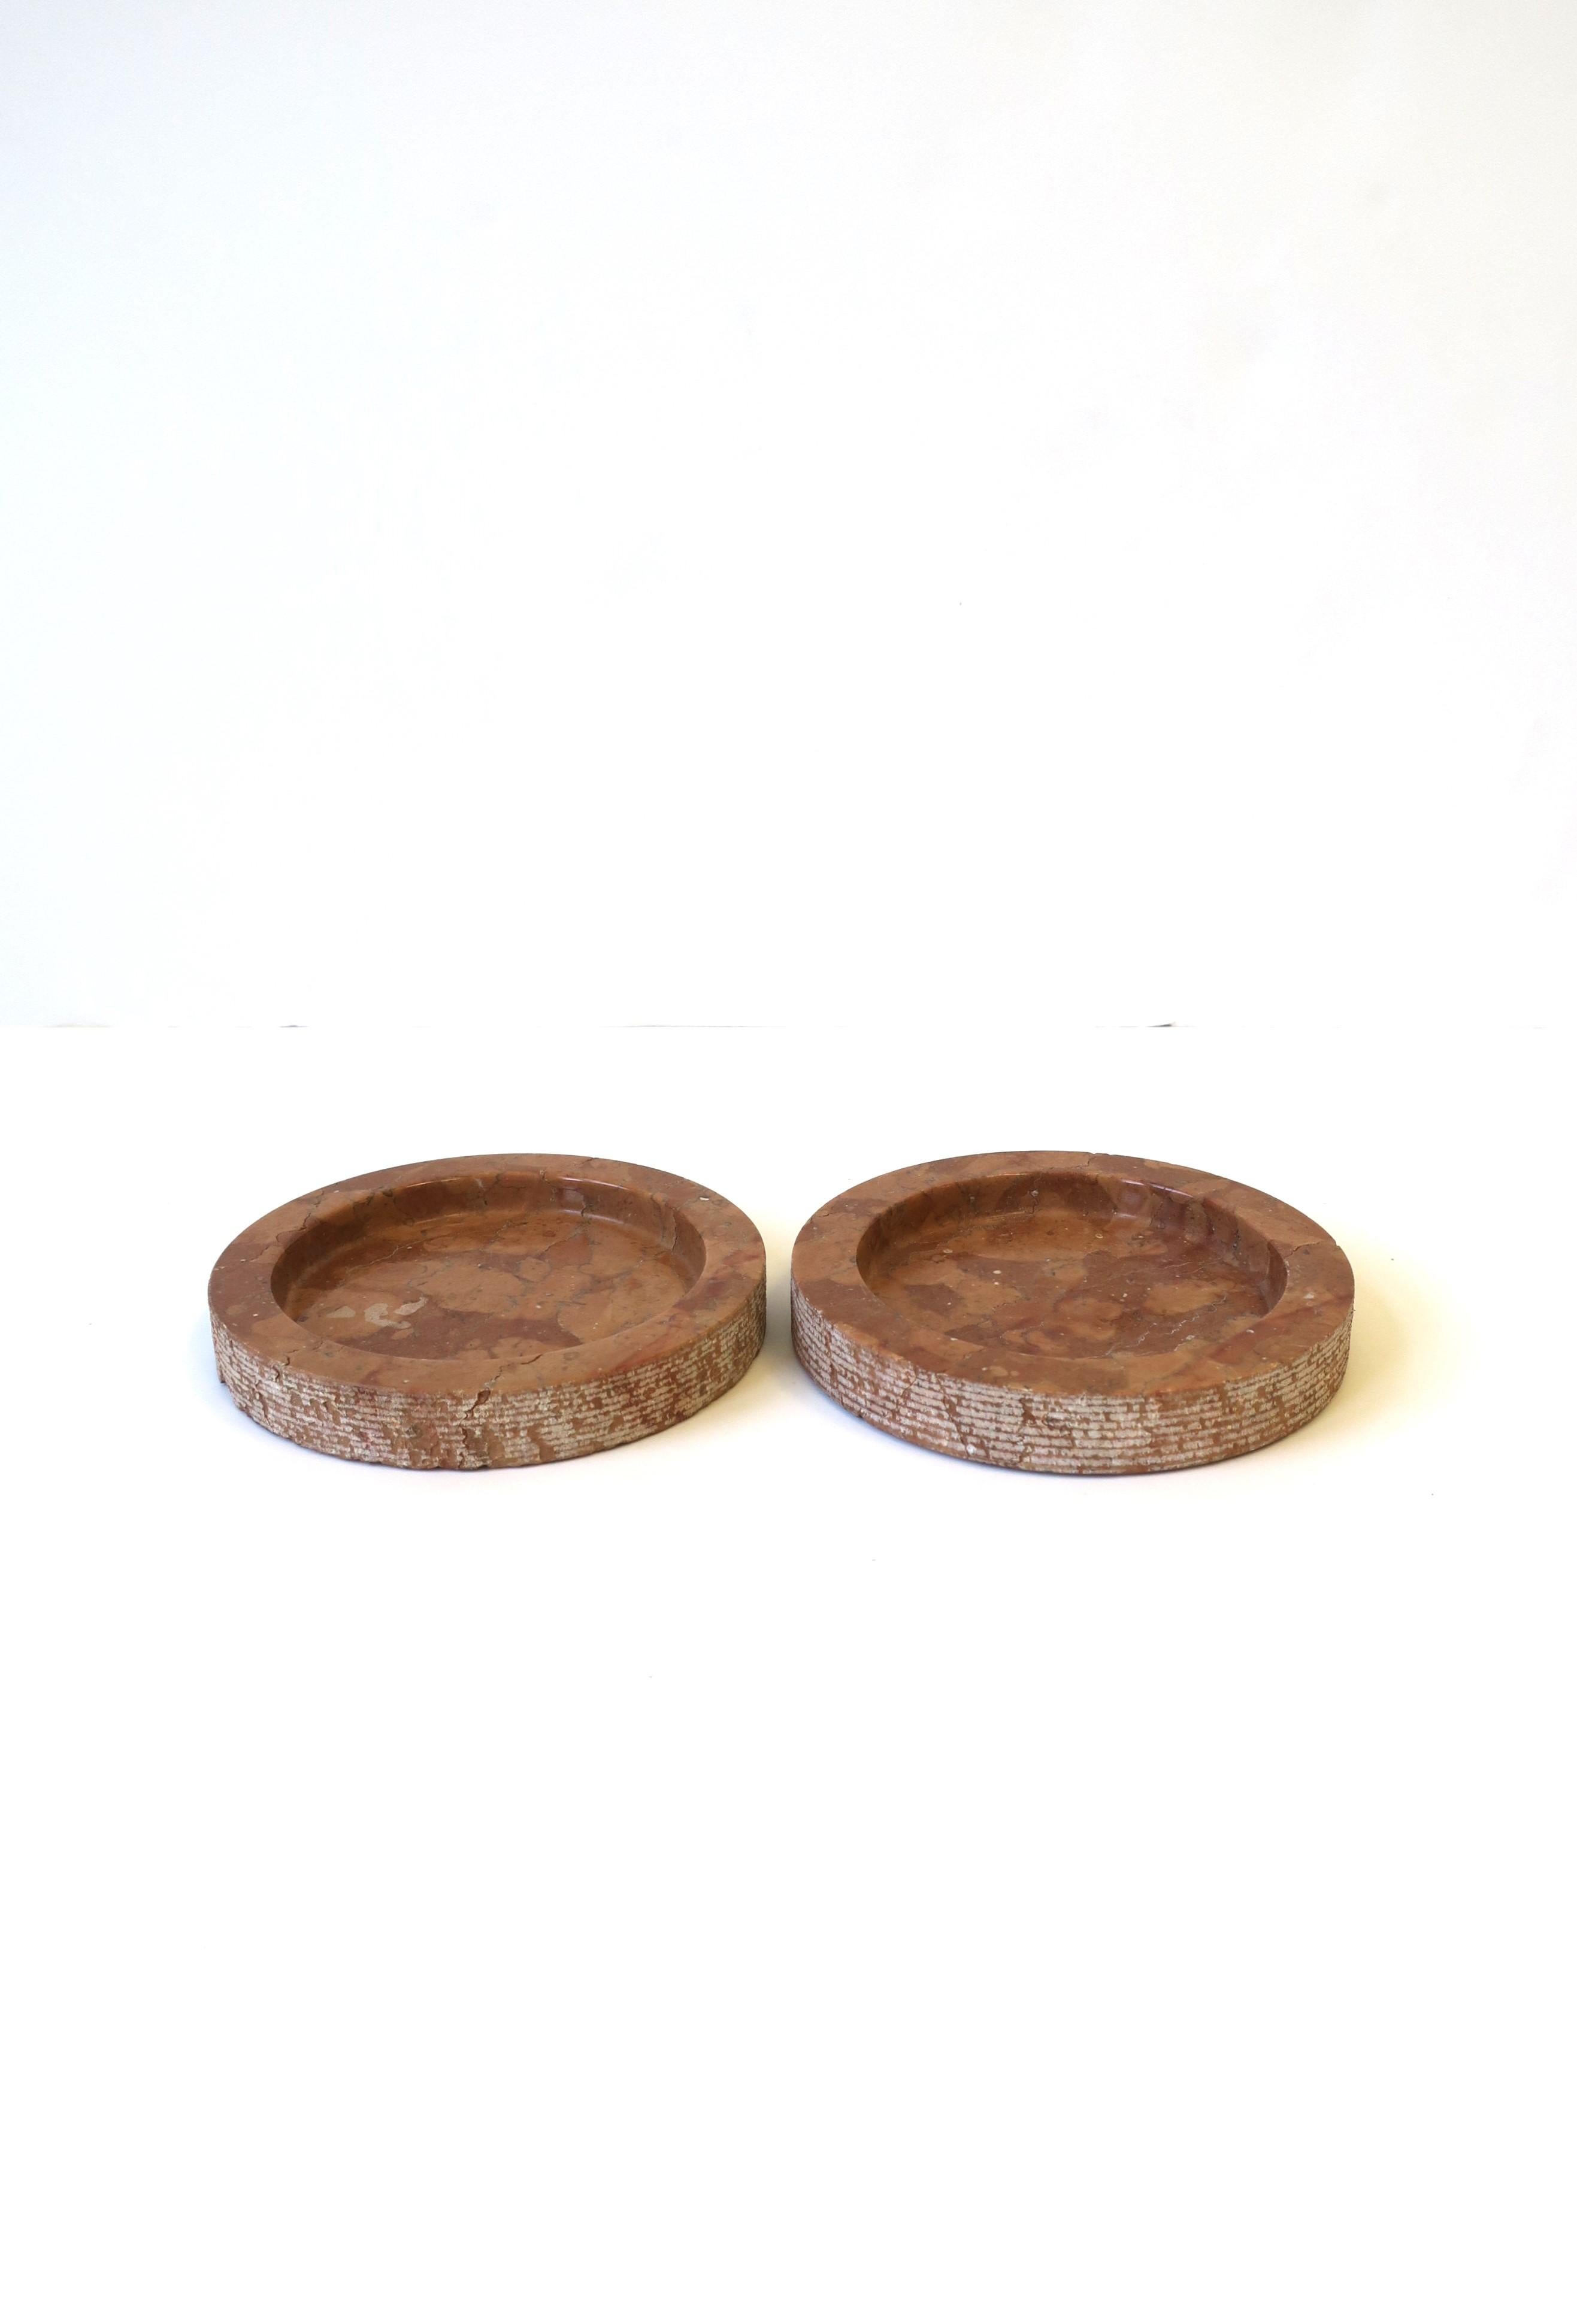 Polished Italian Postmodern Marble Terracotta Wine Bottle Coaster or Catchall, Set of 2 For Sale